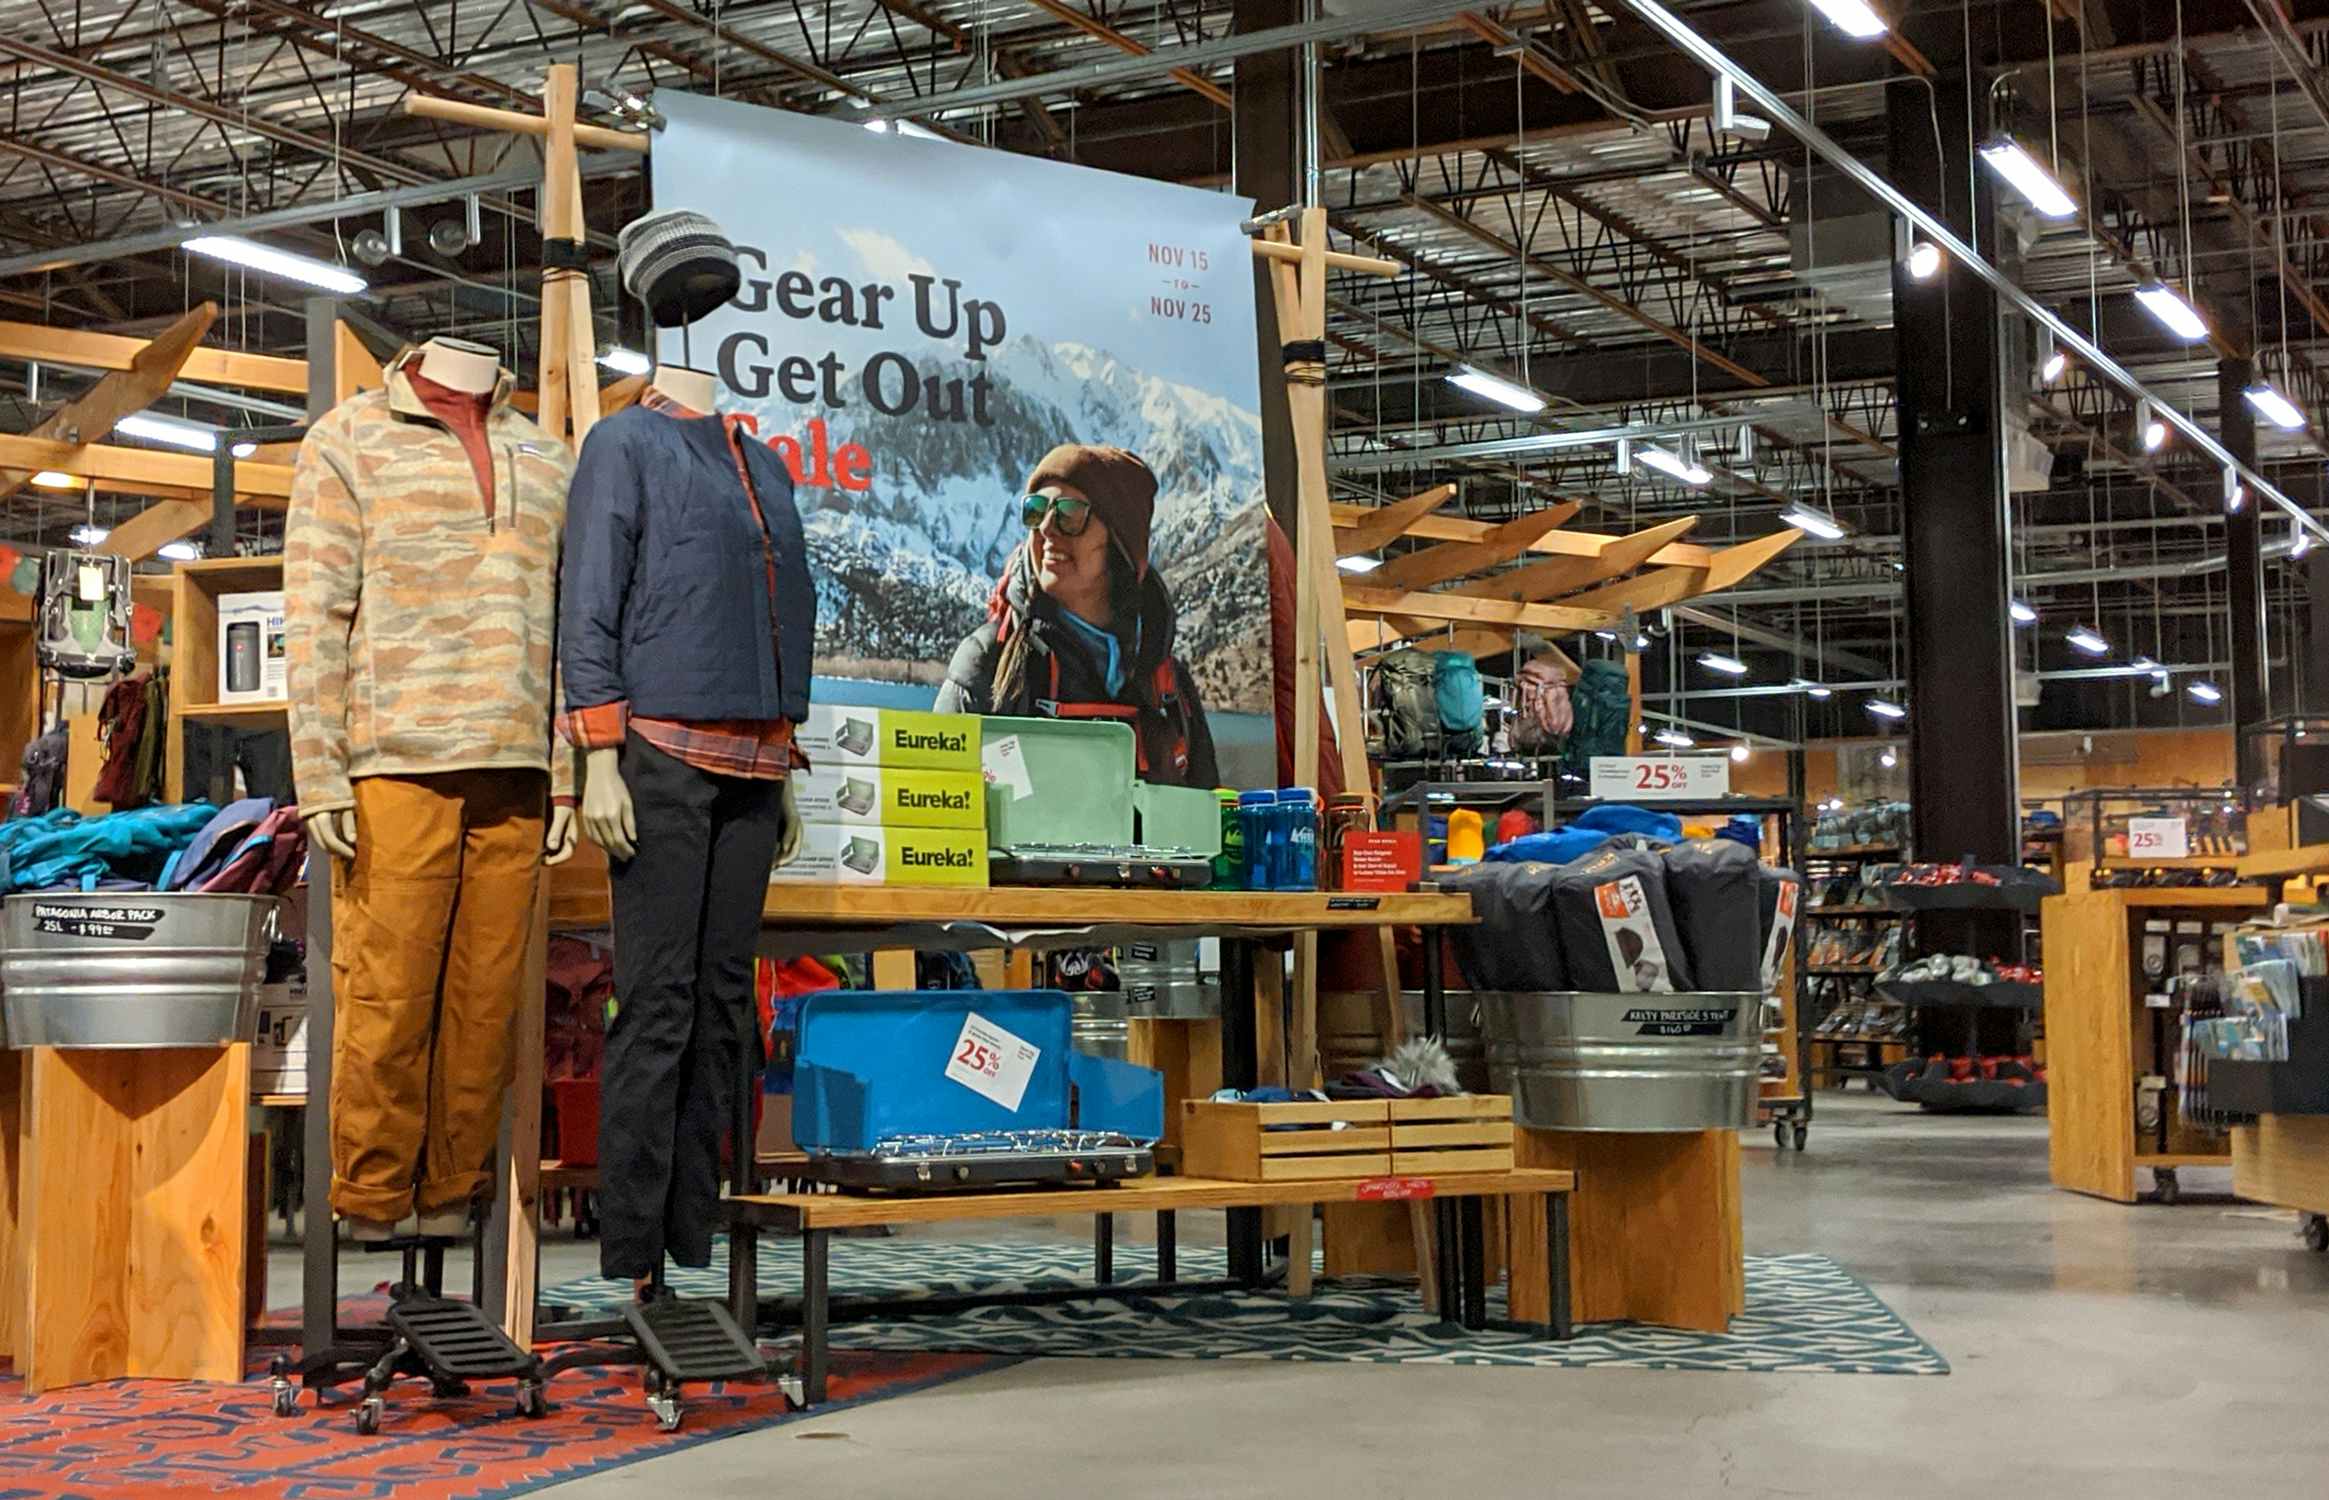 REI Gear Up Get Out sale display in store